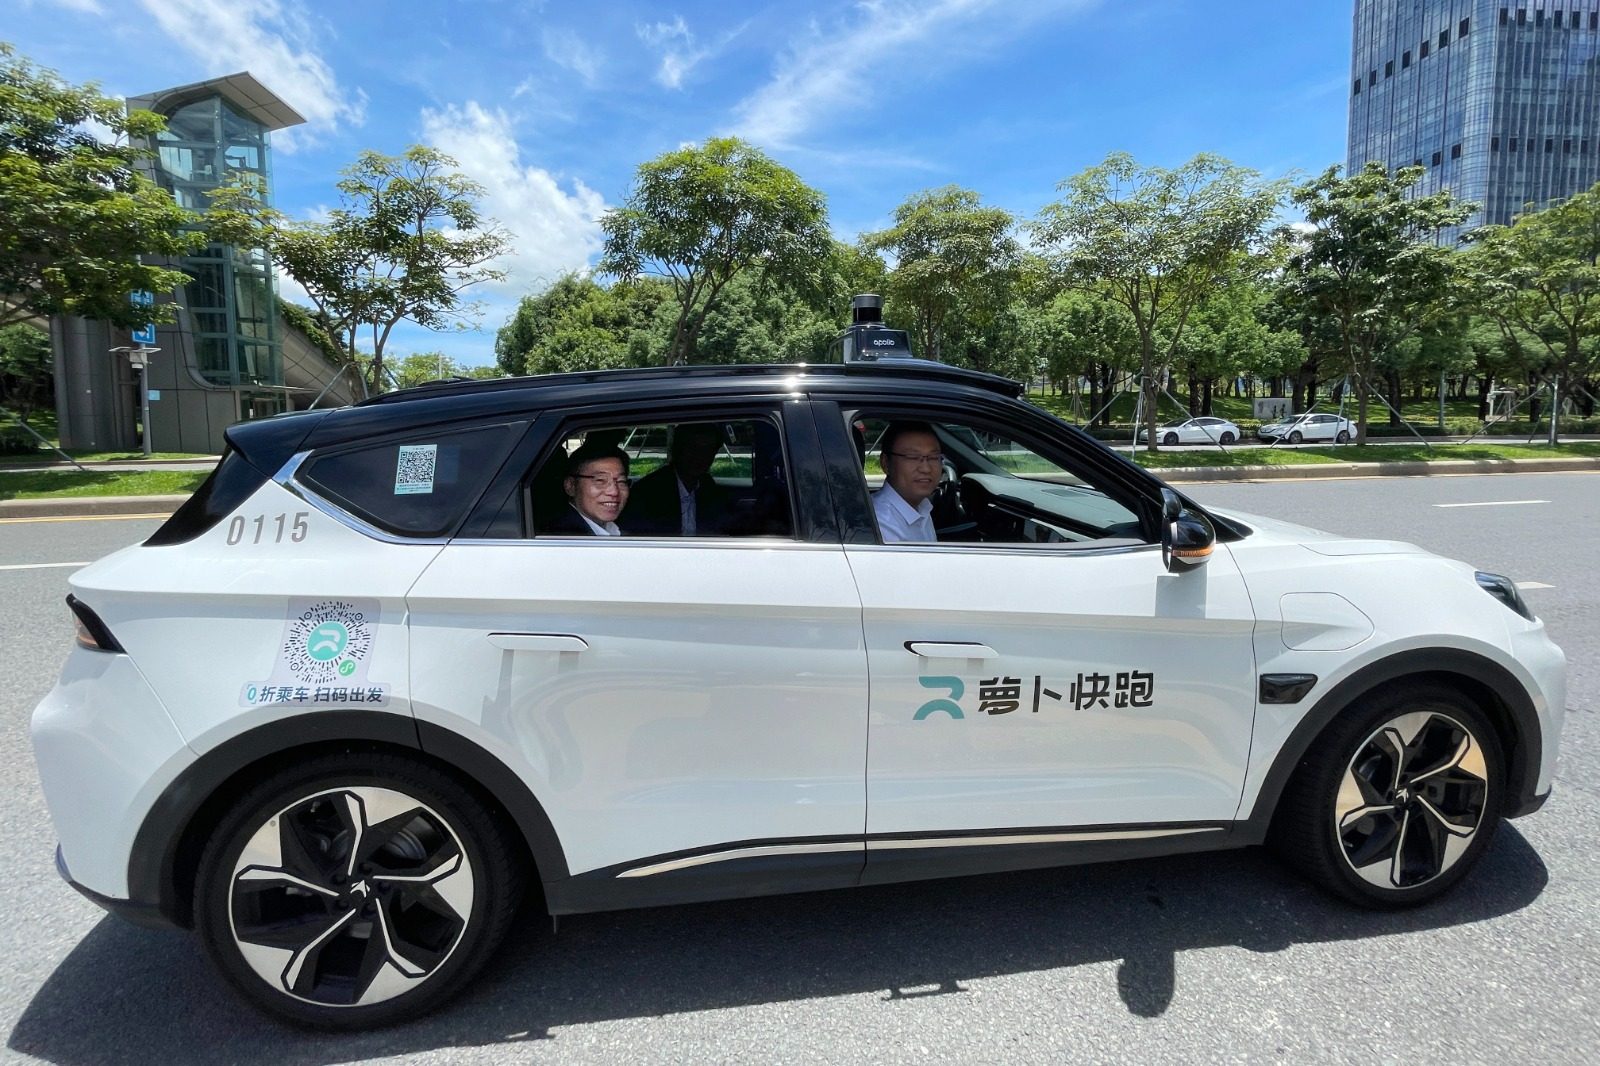 Secretary for Transport and Logistics Lam Sai-hung takes a ride in a self-driving car in Nanshan, Shenzhen, in July 2023. Photo: Information Services Department